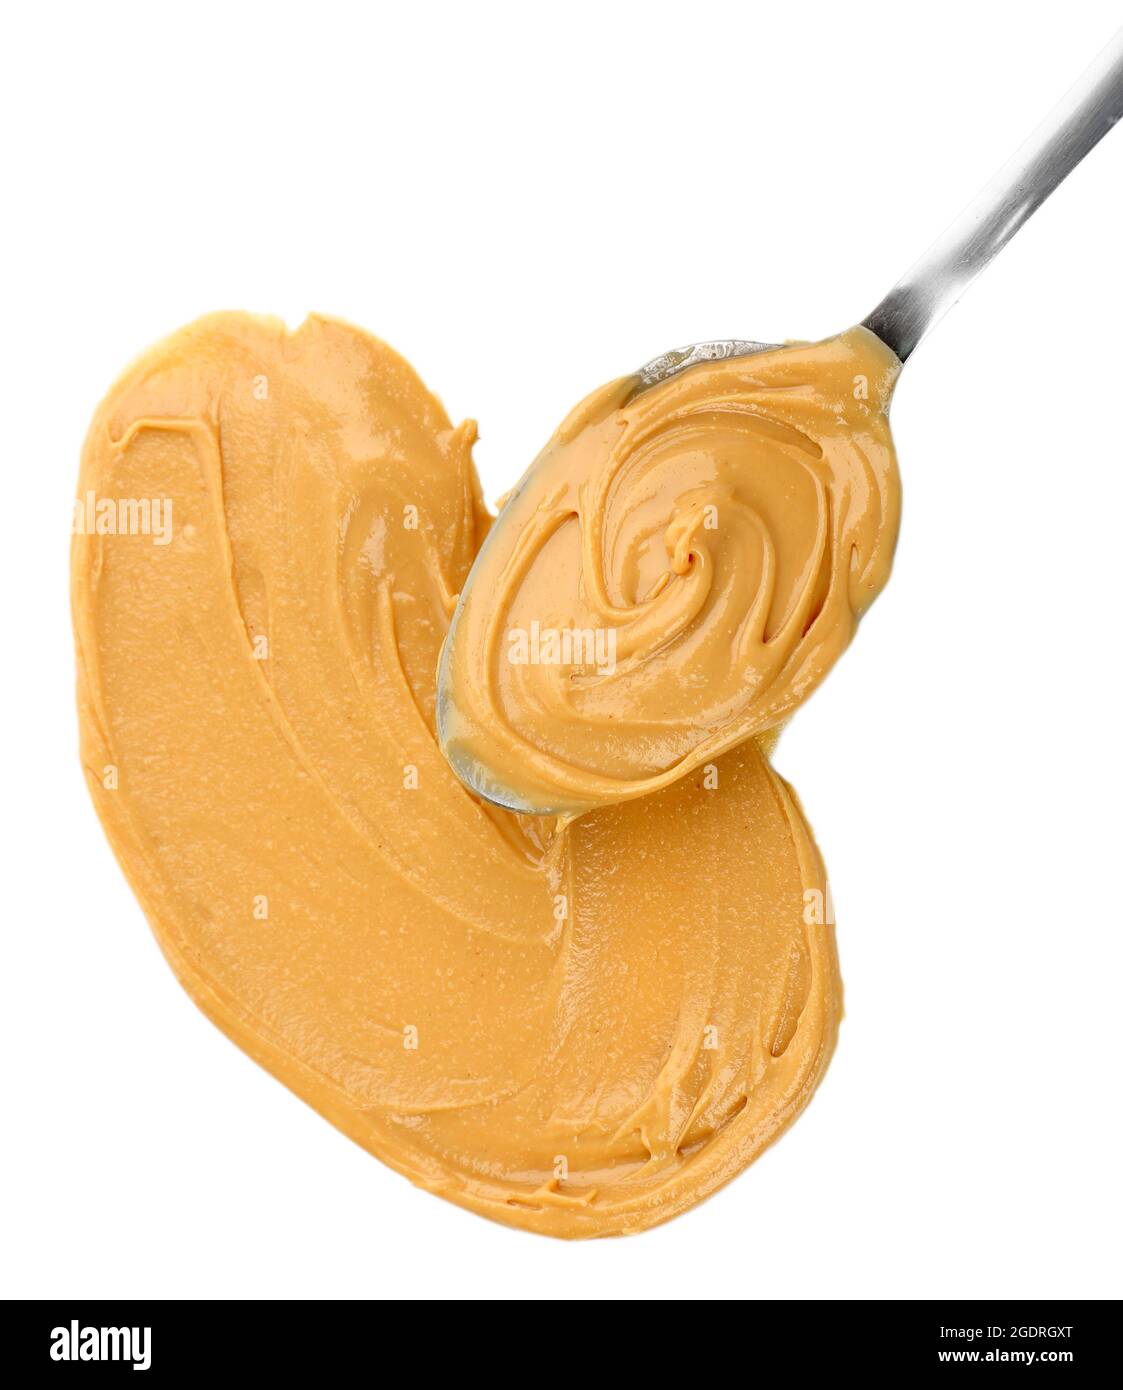 https://c8.alamy.com/comp/2GDRGXT/creamy-peanut-butter-in-spoon-isolated-on-white-2GDRGXT.jpg